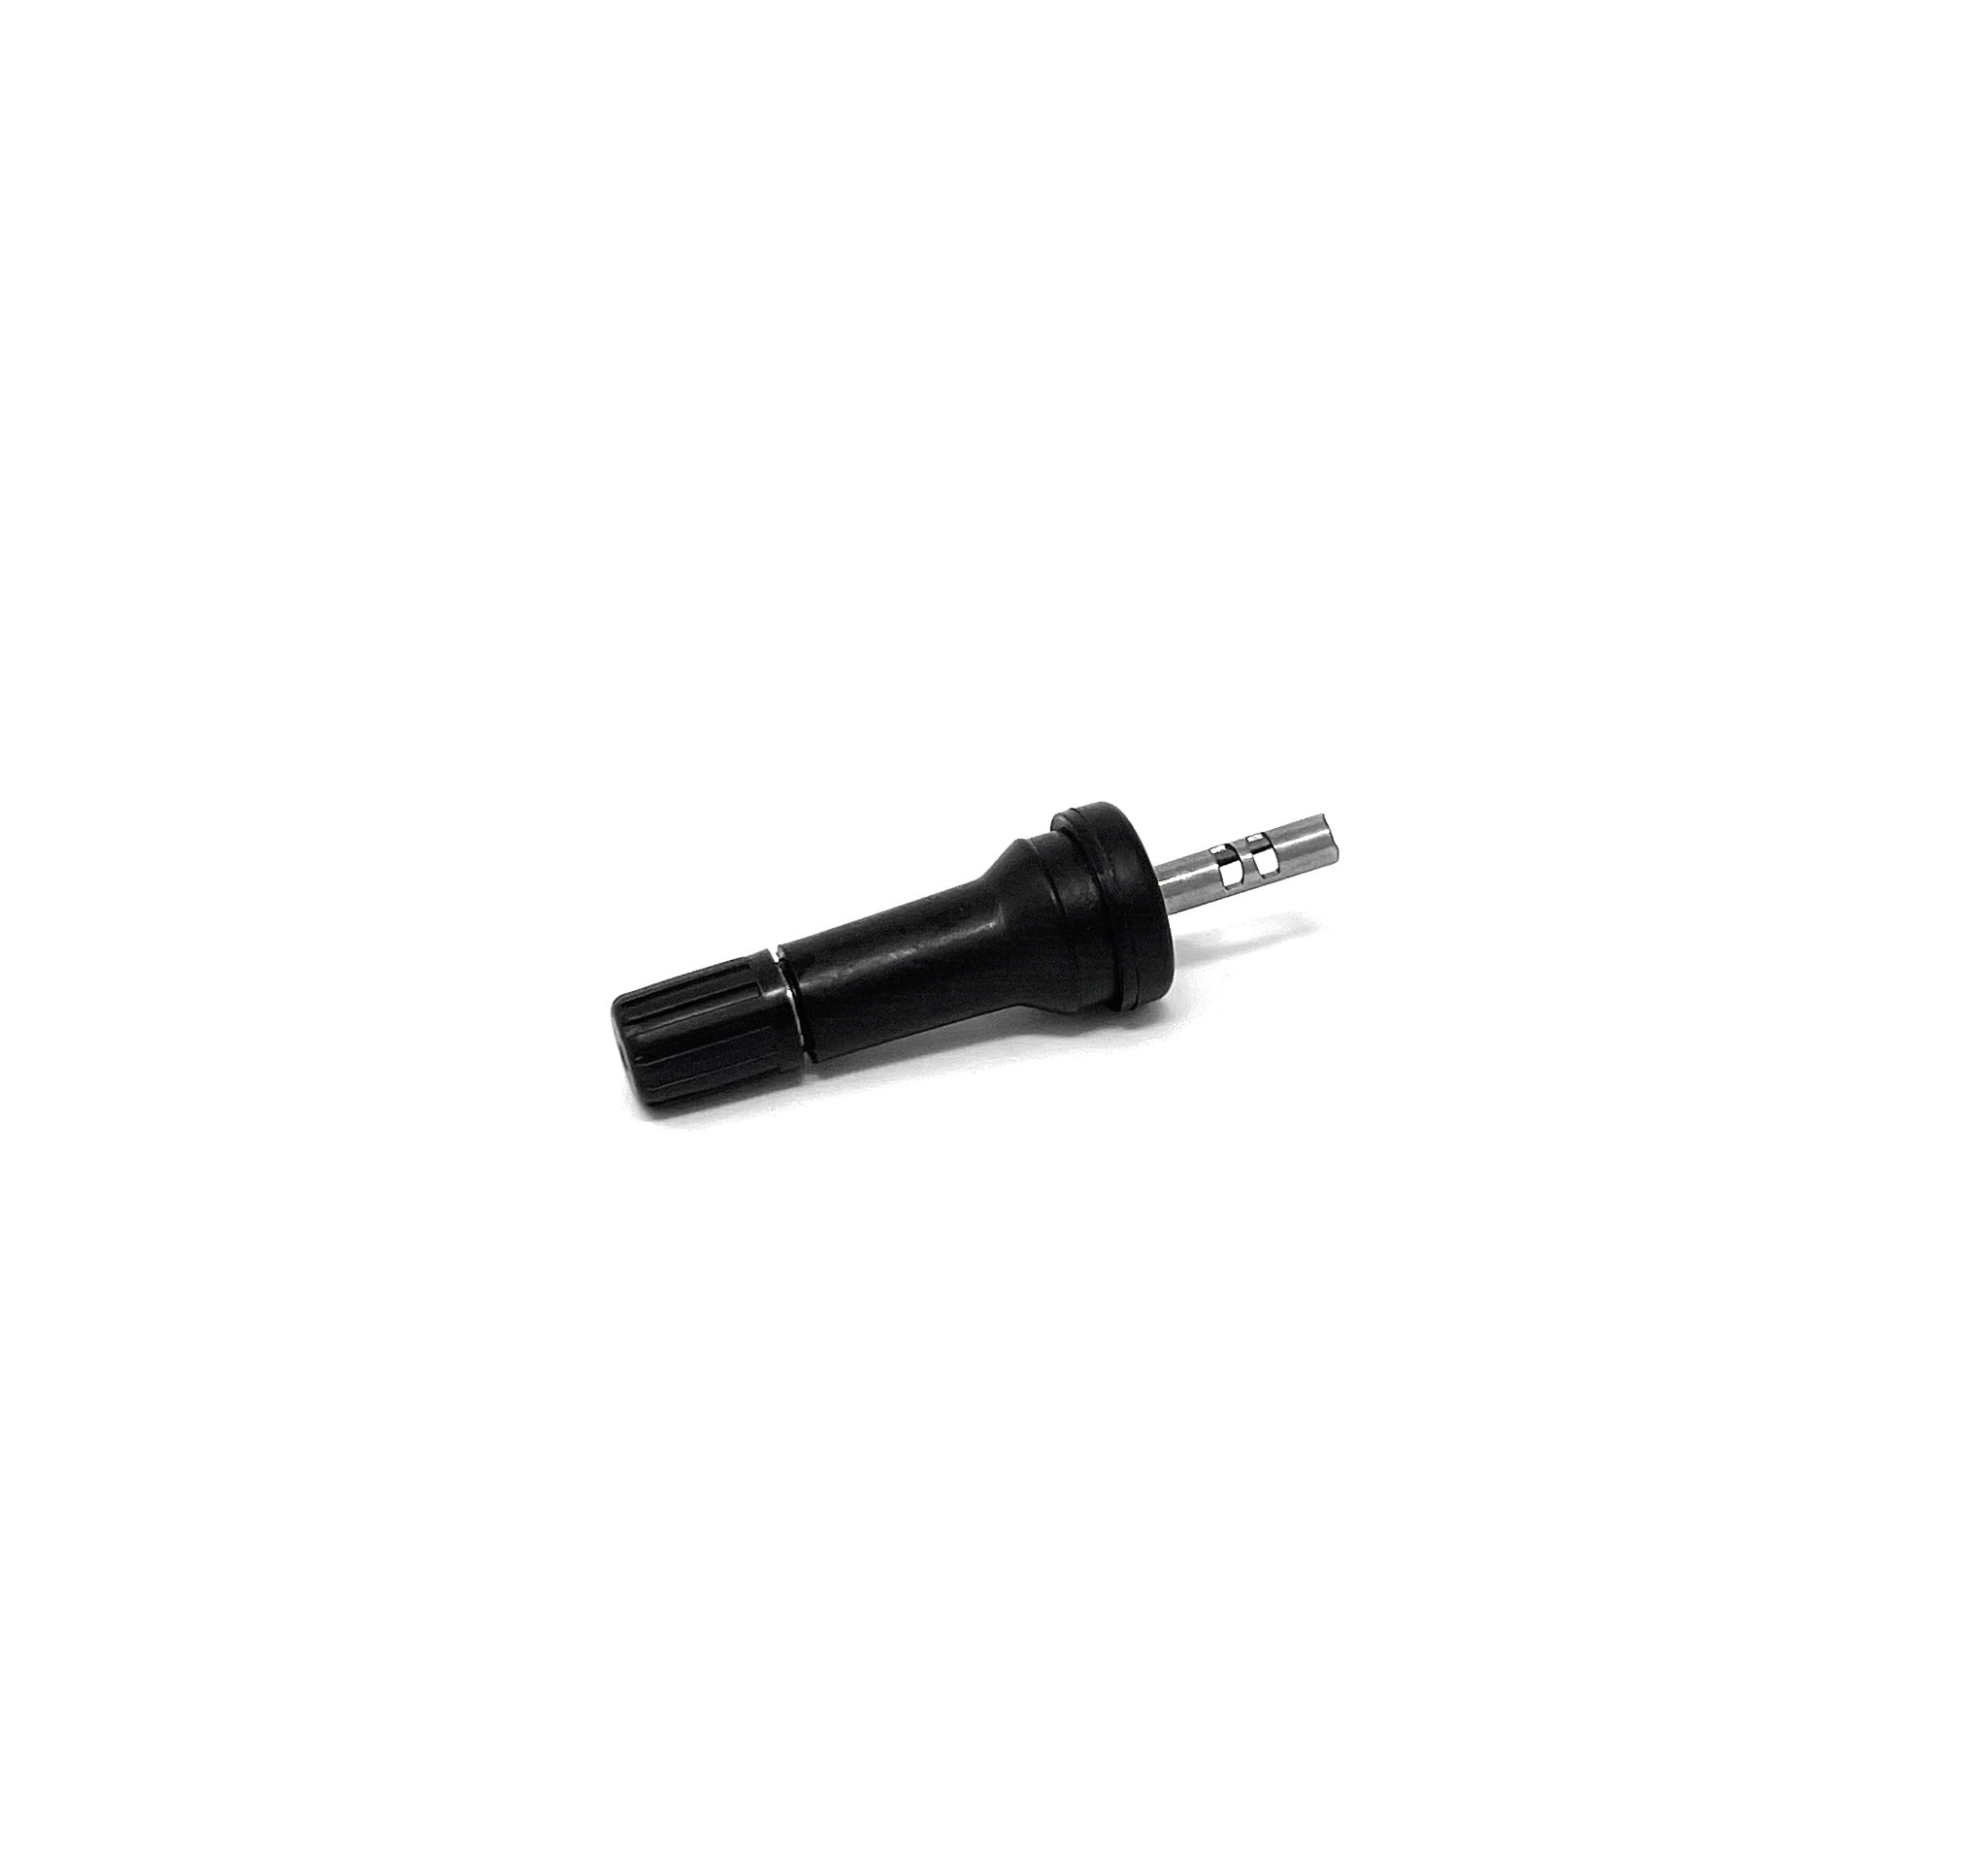 TPMS Valve Stem For Pacific N11